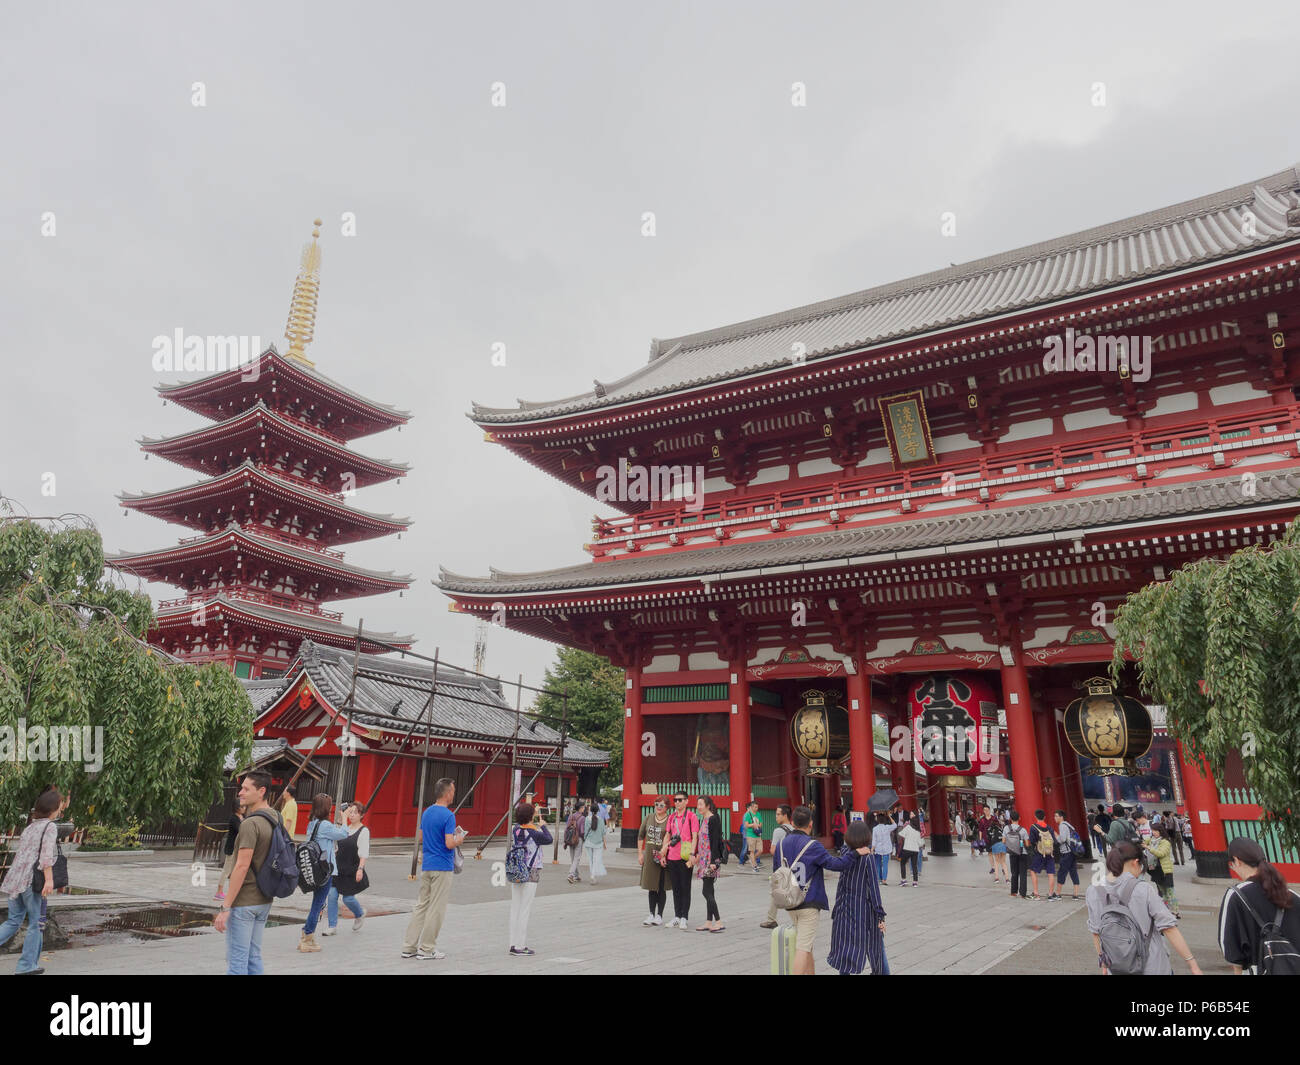 TOKYO, JAPAN - SEPTEMBER 28, 2017 : Hozomon, treasure house gate, is the famous tourist destination leads to the Senso-ji with 5 storied pagoda on the background in Asakusa Stock Photo